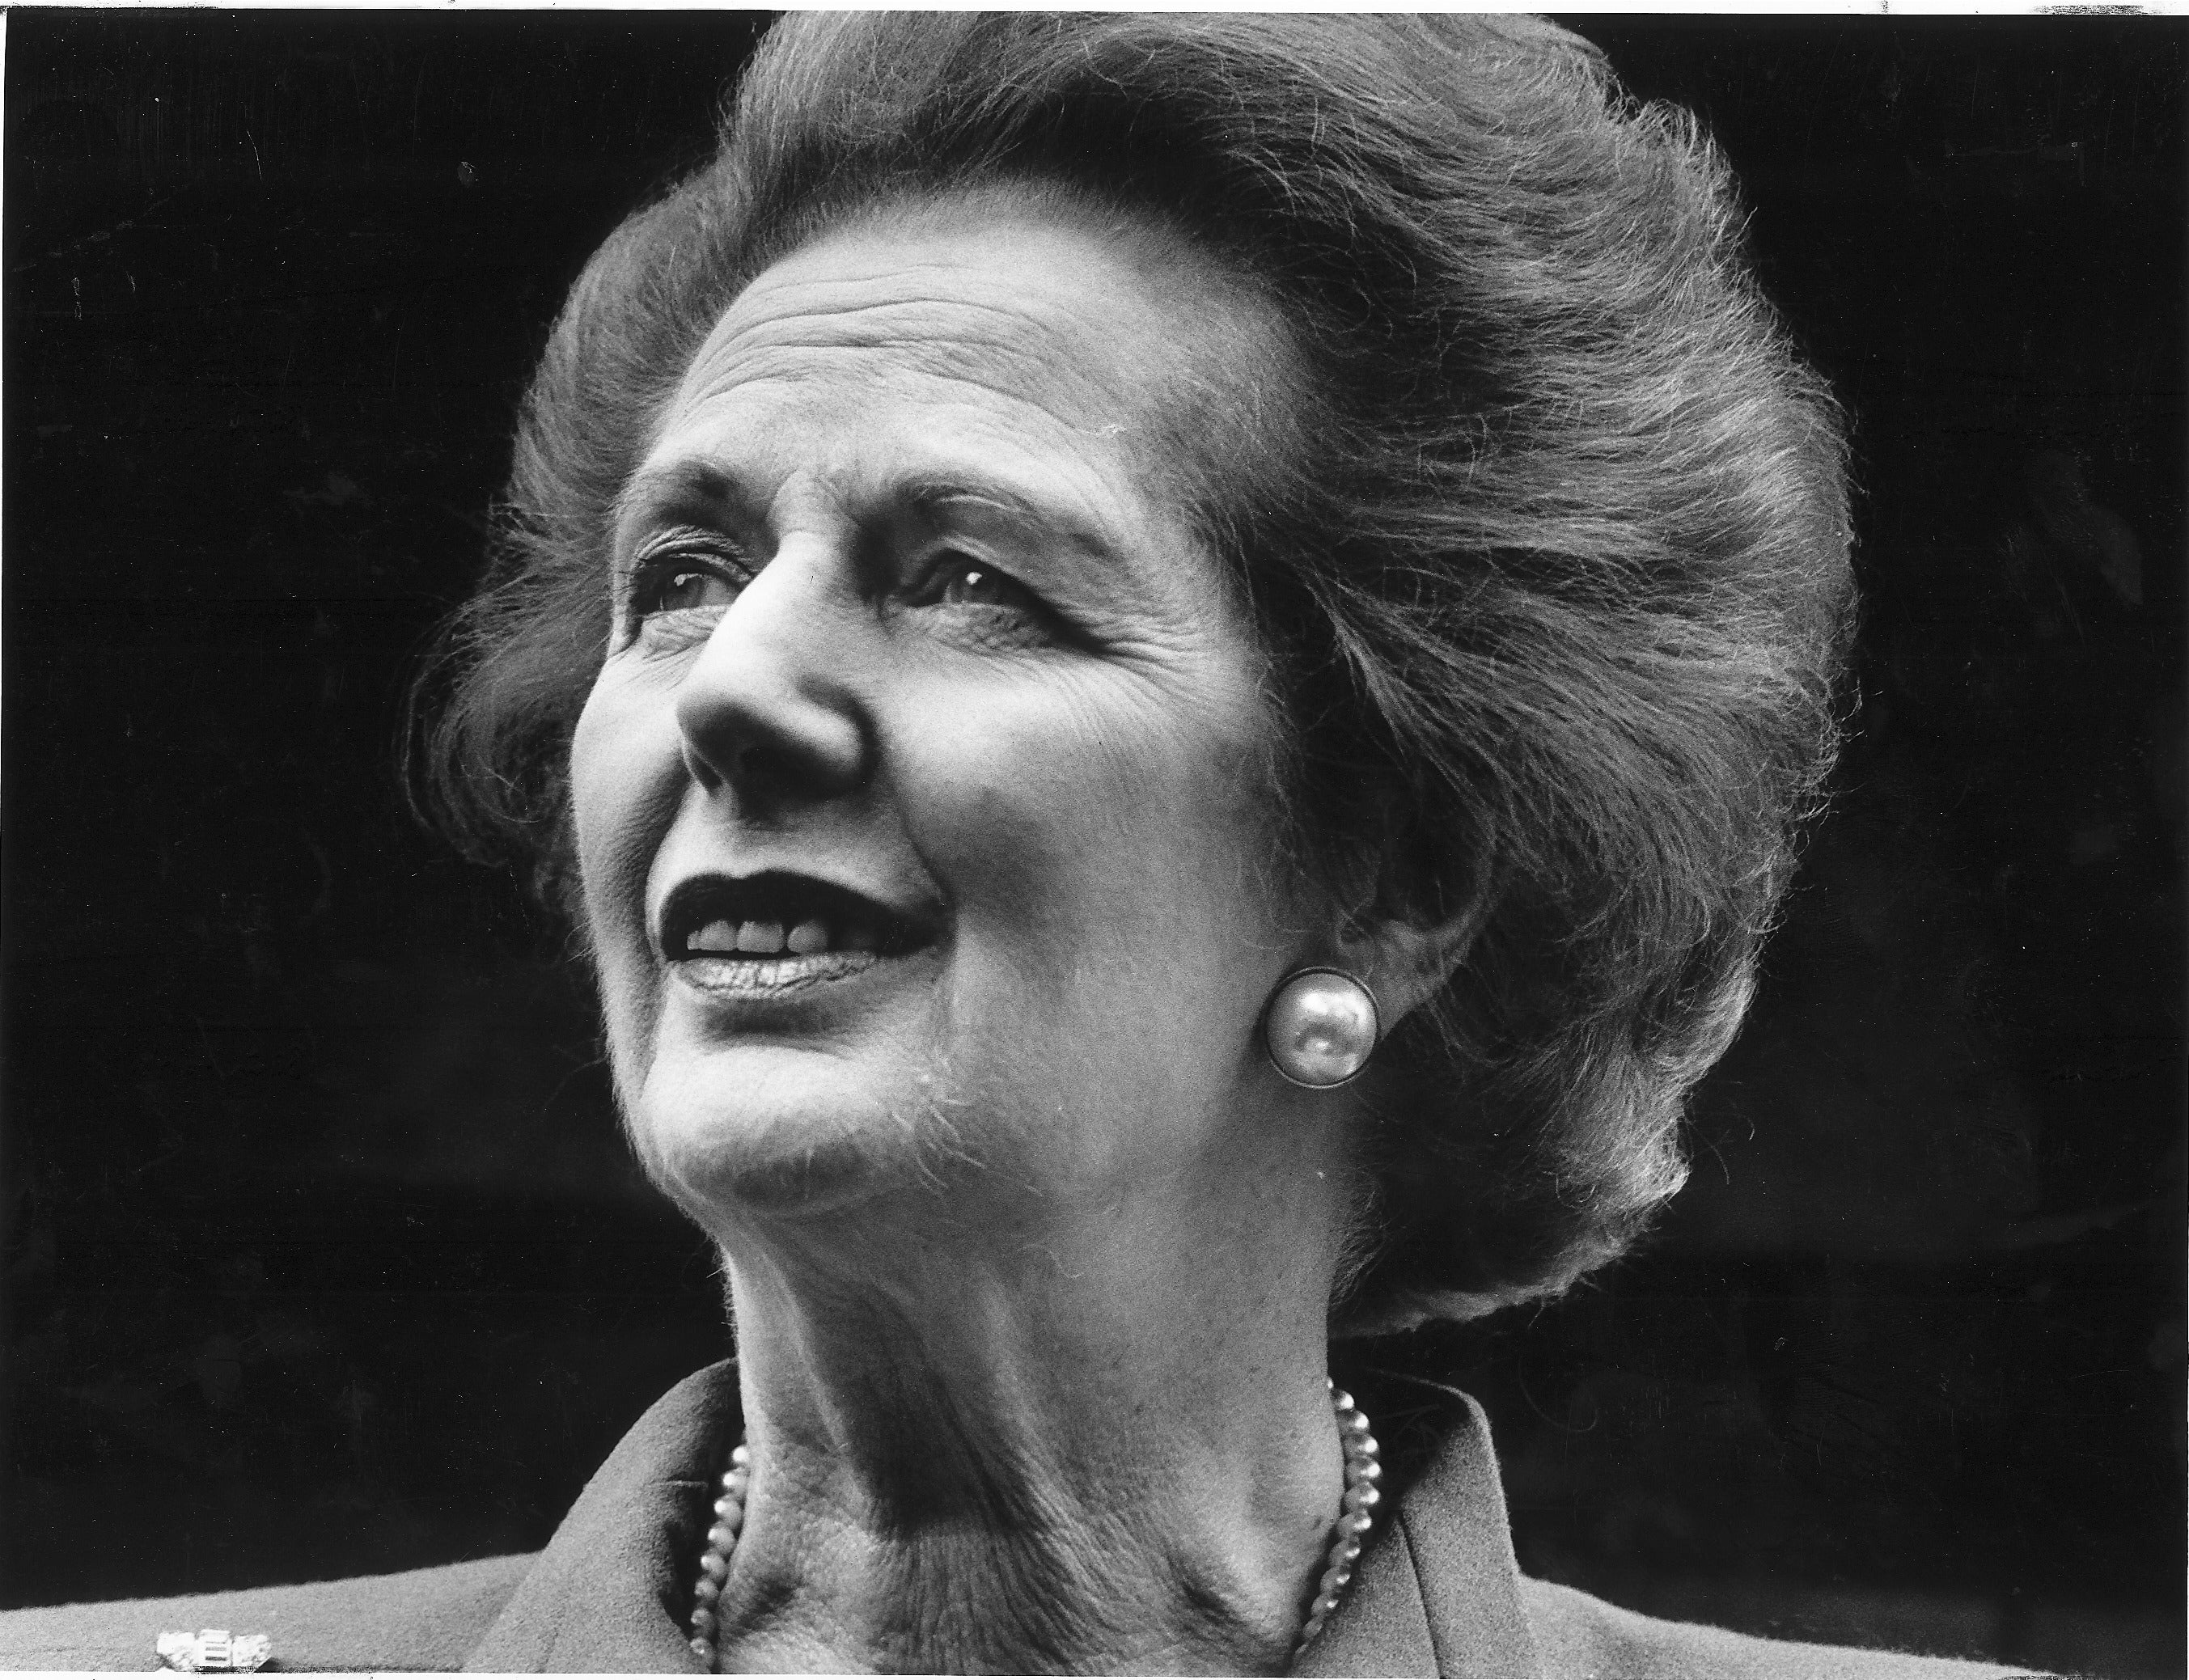 In the late 1980s Thatcher used her platform as a world leader to draw attention to climate change